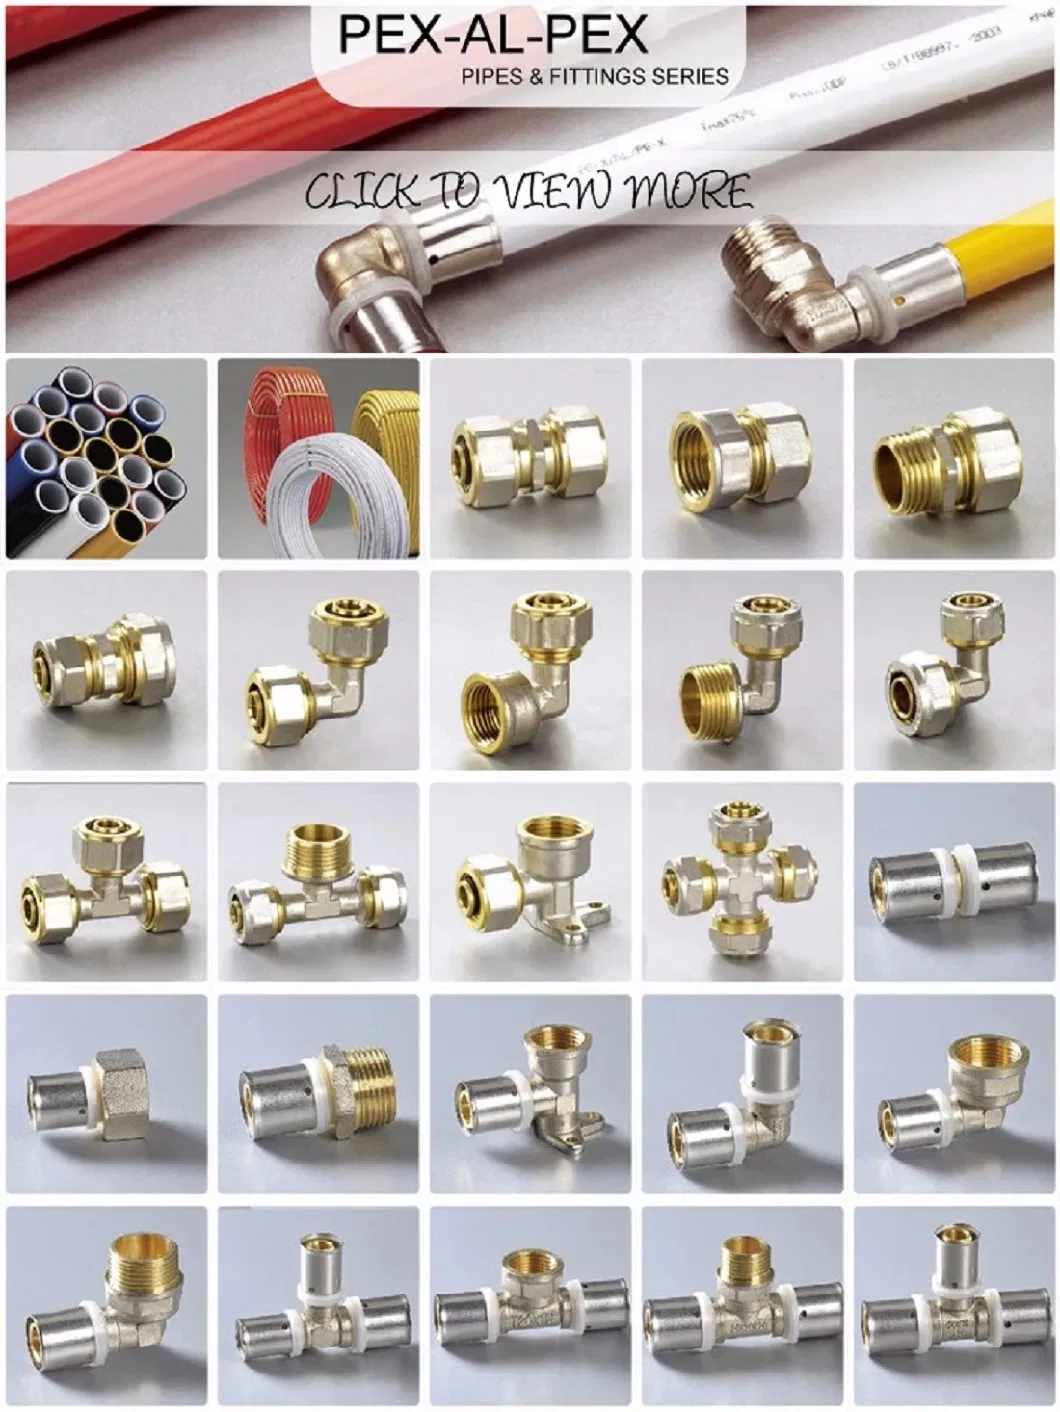 Male Female Thread Stainless Steel Pex Fitting Straight Nipple Connector